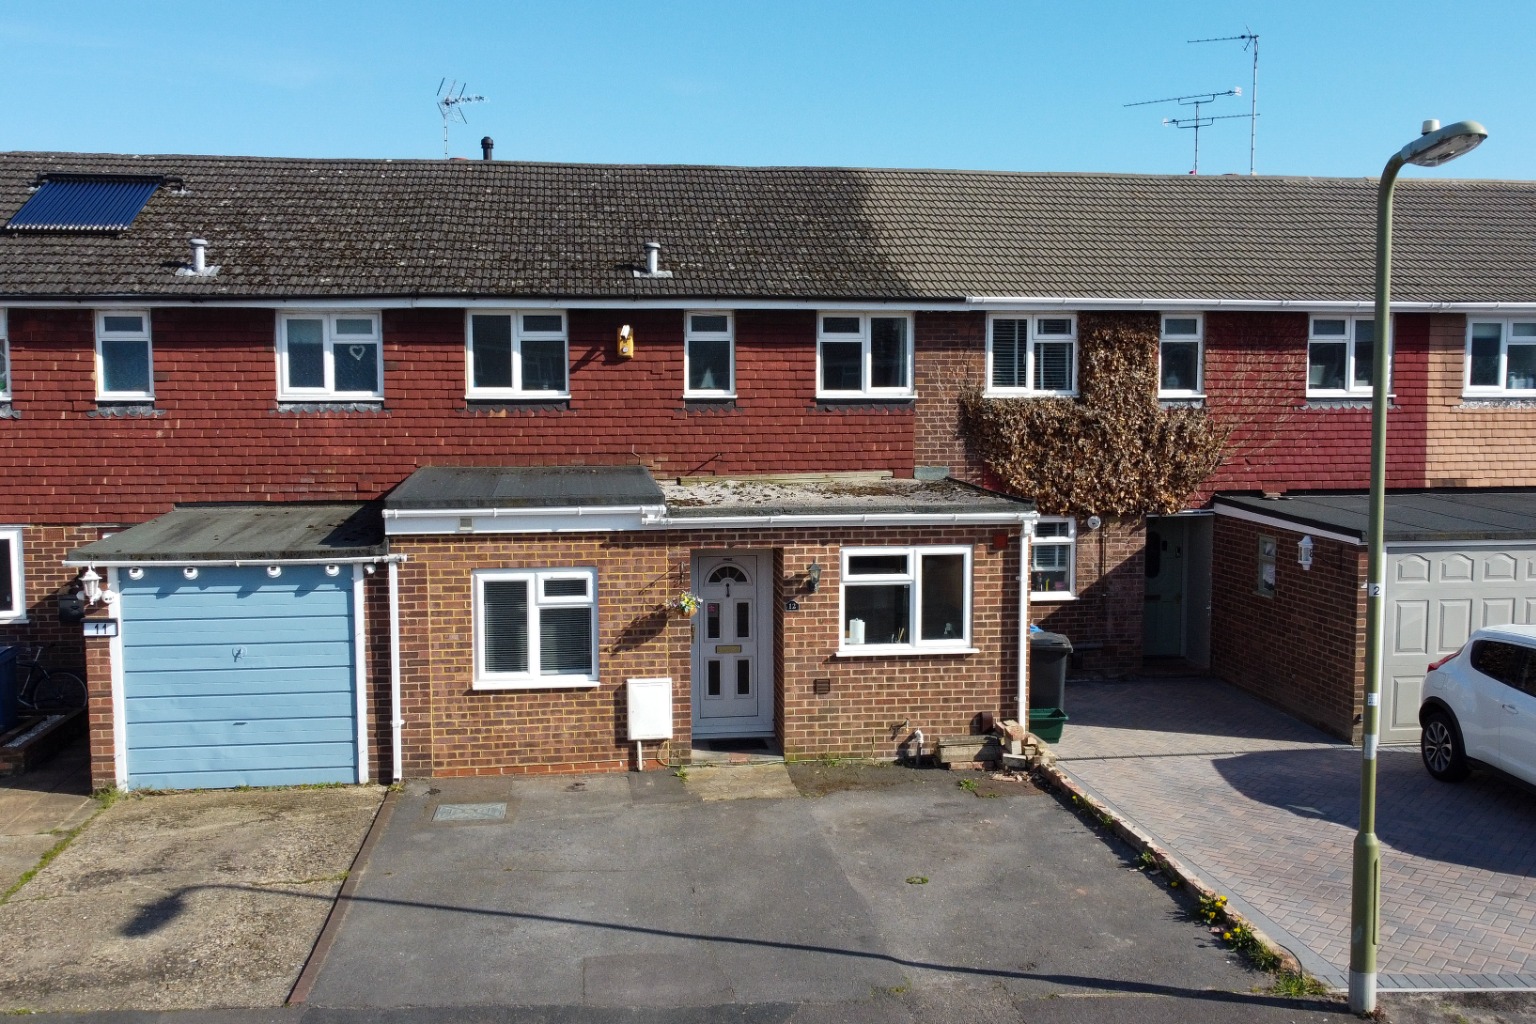 *MARKETED BY CHRIS GRAY* An extended terraced family home situated in a cul-de-sac location within a short distance of local amenities and commuter links.